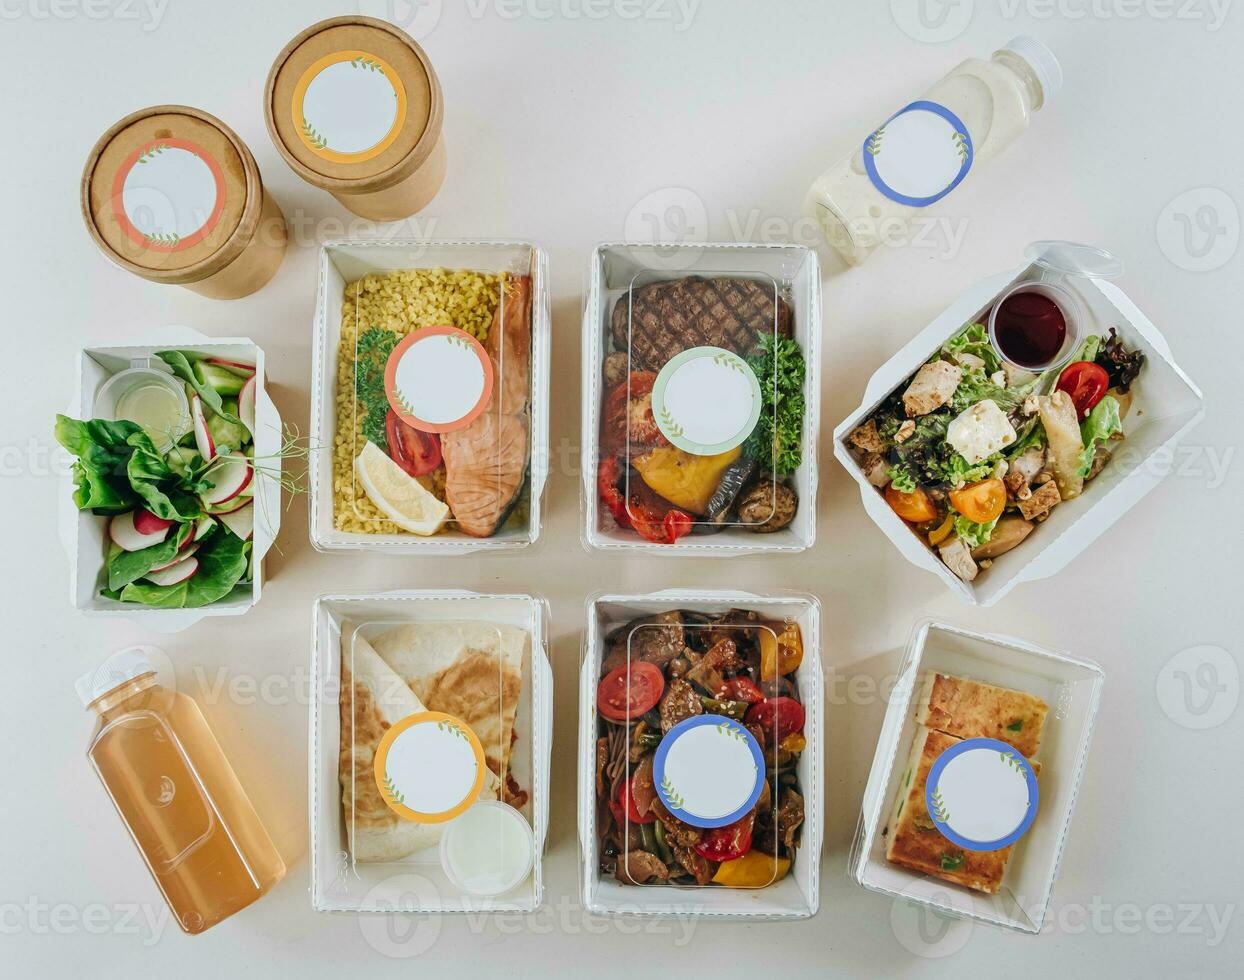 food in containers. proper nutrition, daily diet, weight loss. soup, drink, salad, steak. Top view photo